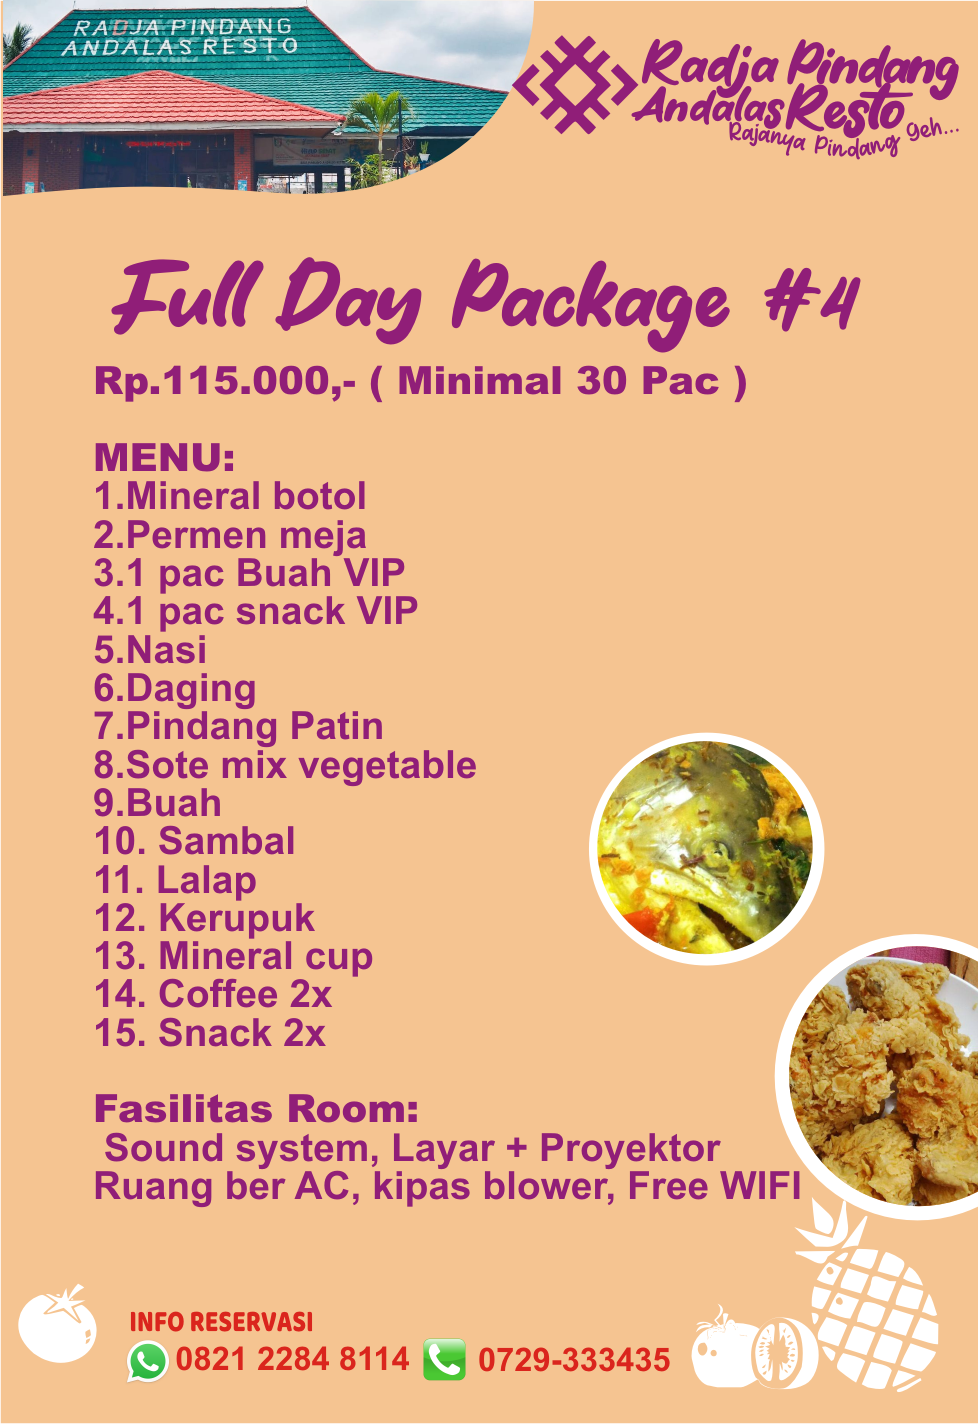 FULL DAY PACKAGE #4